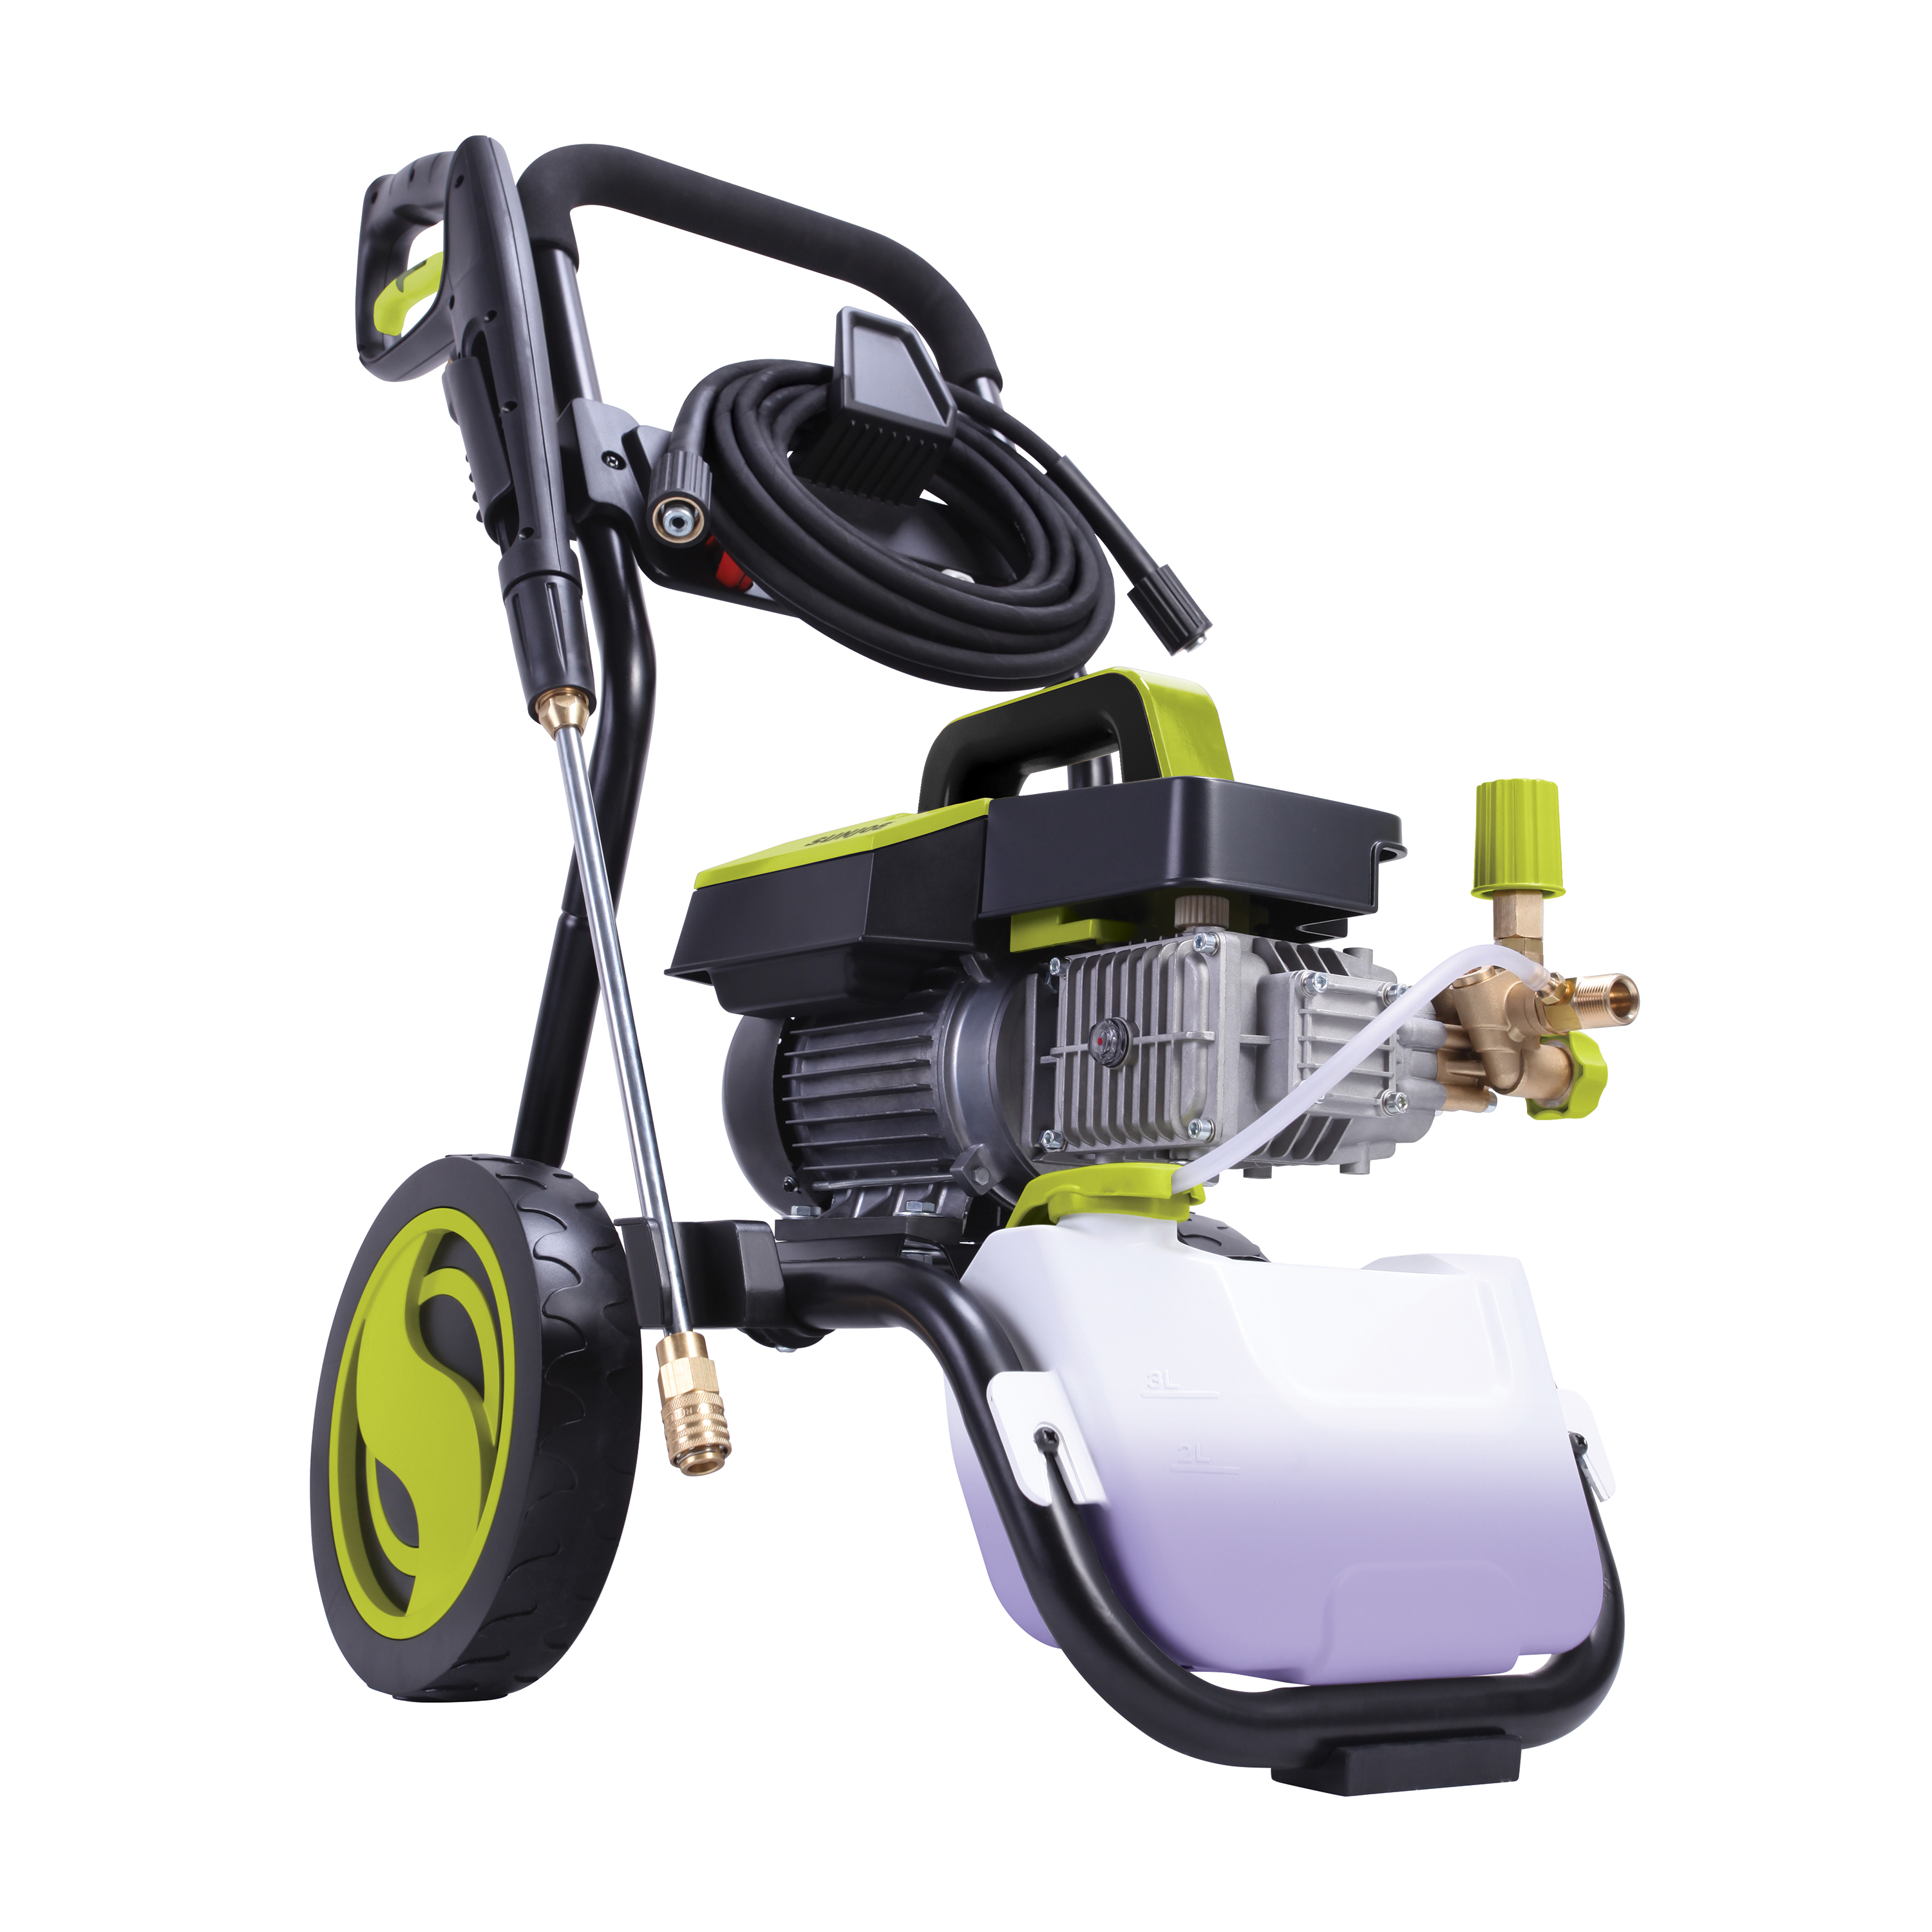 Sun Joe SPX9005PRO Commercial Portable Pressure Washer with Roll Cage1300PSI Max2.15HP Motor